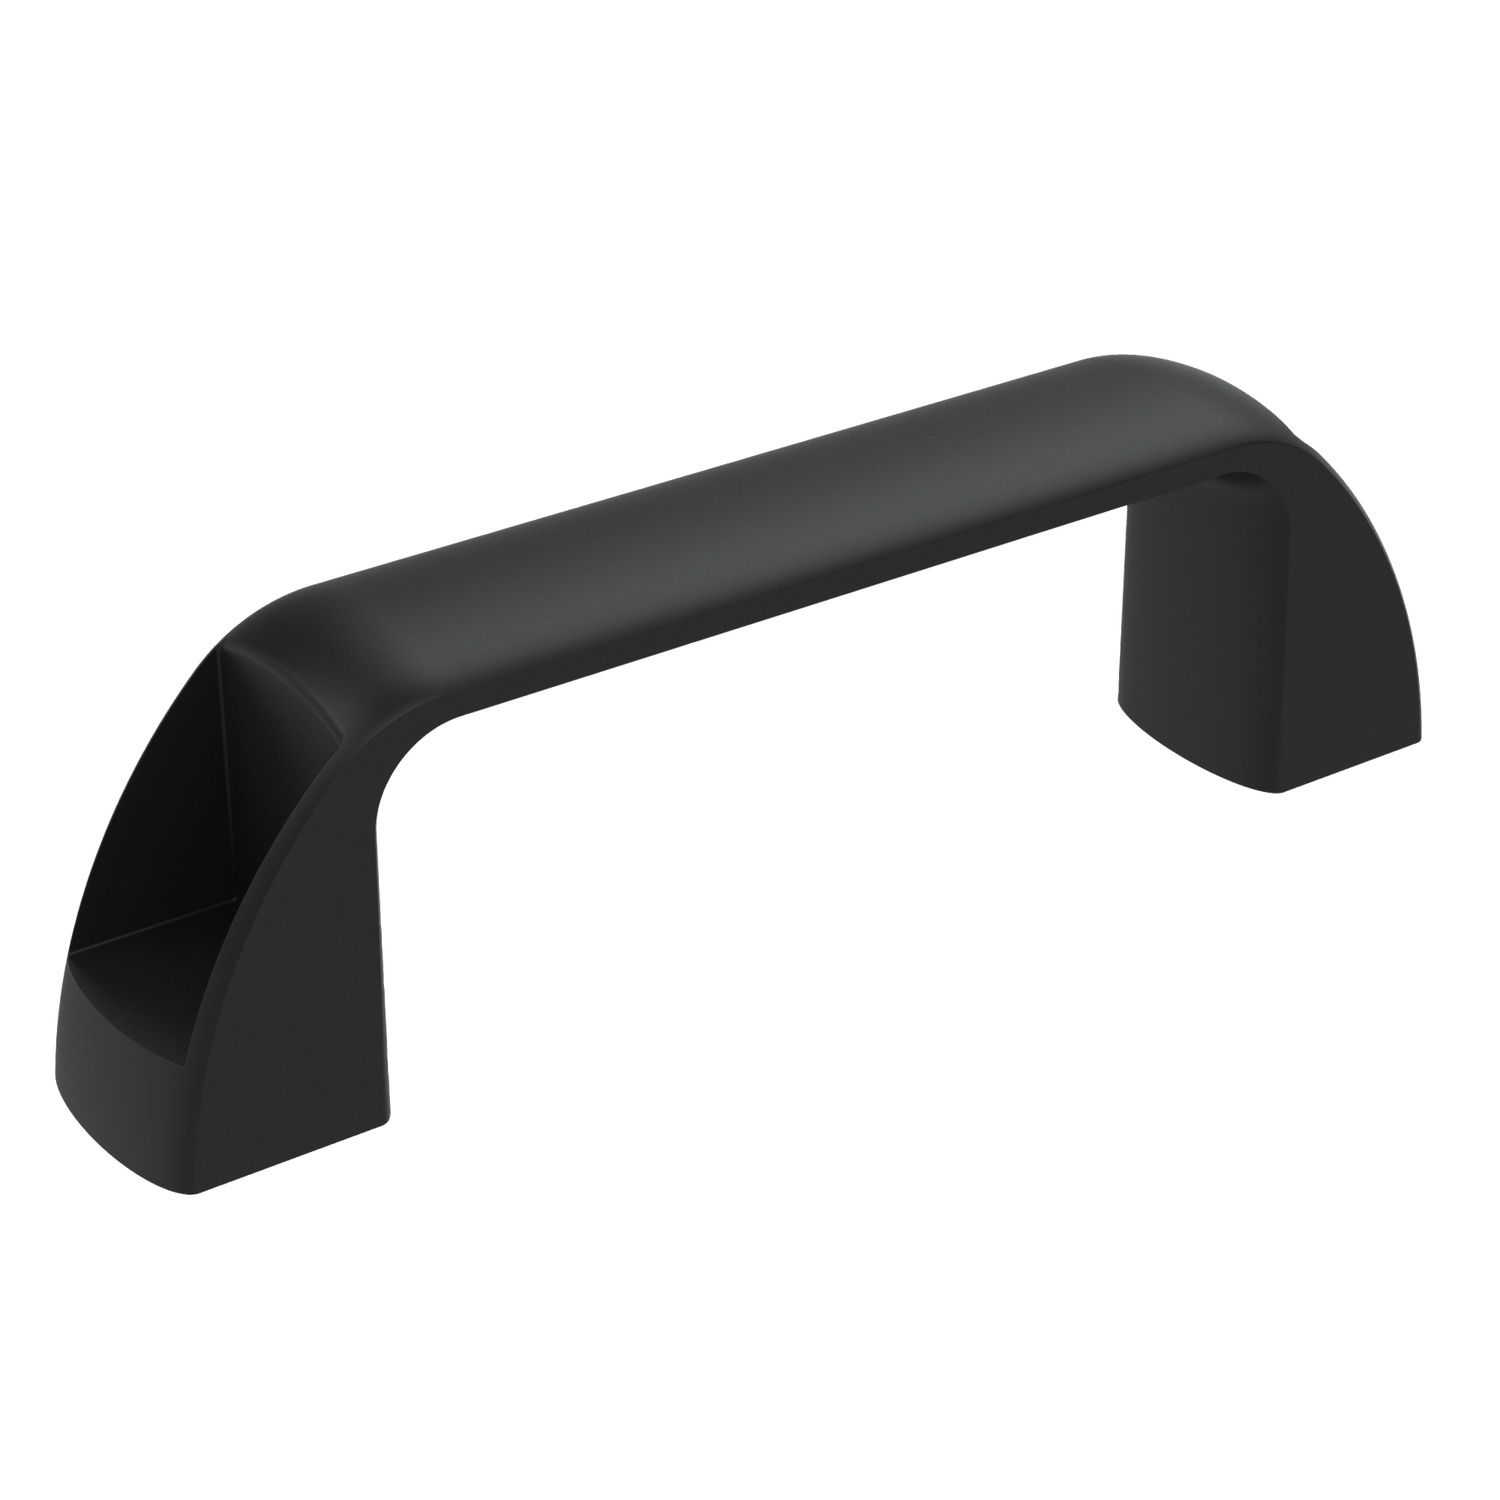 Plastic Pull Handles This model has a through hole or threaded bush, comes in a thermoplastic material. Other colours available on request - subject to a minimum order quantity.